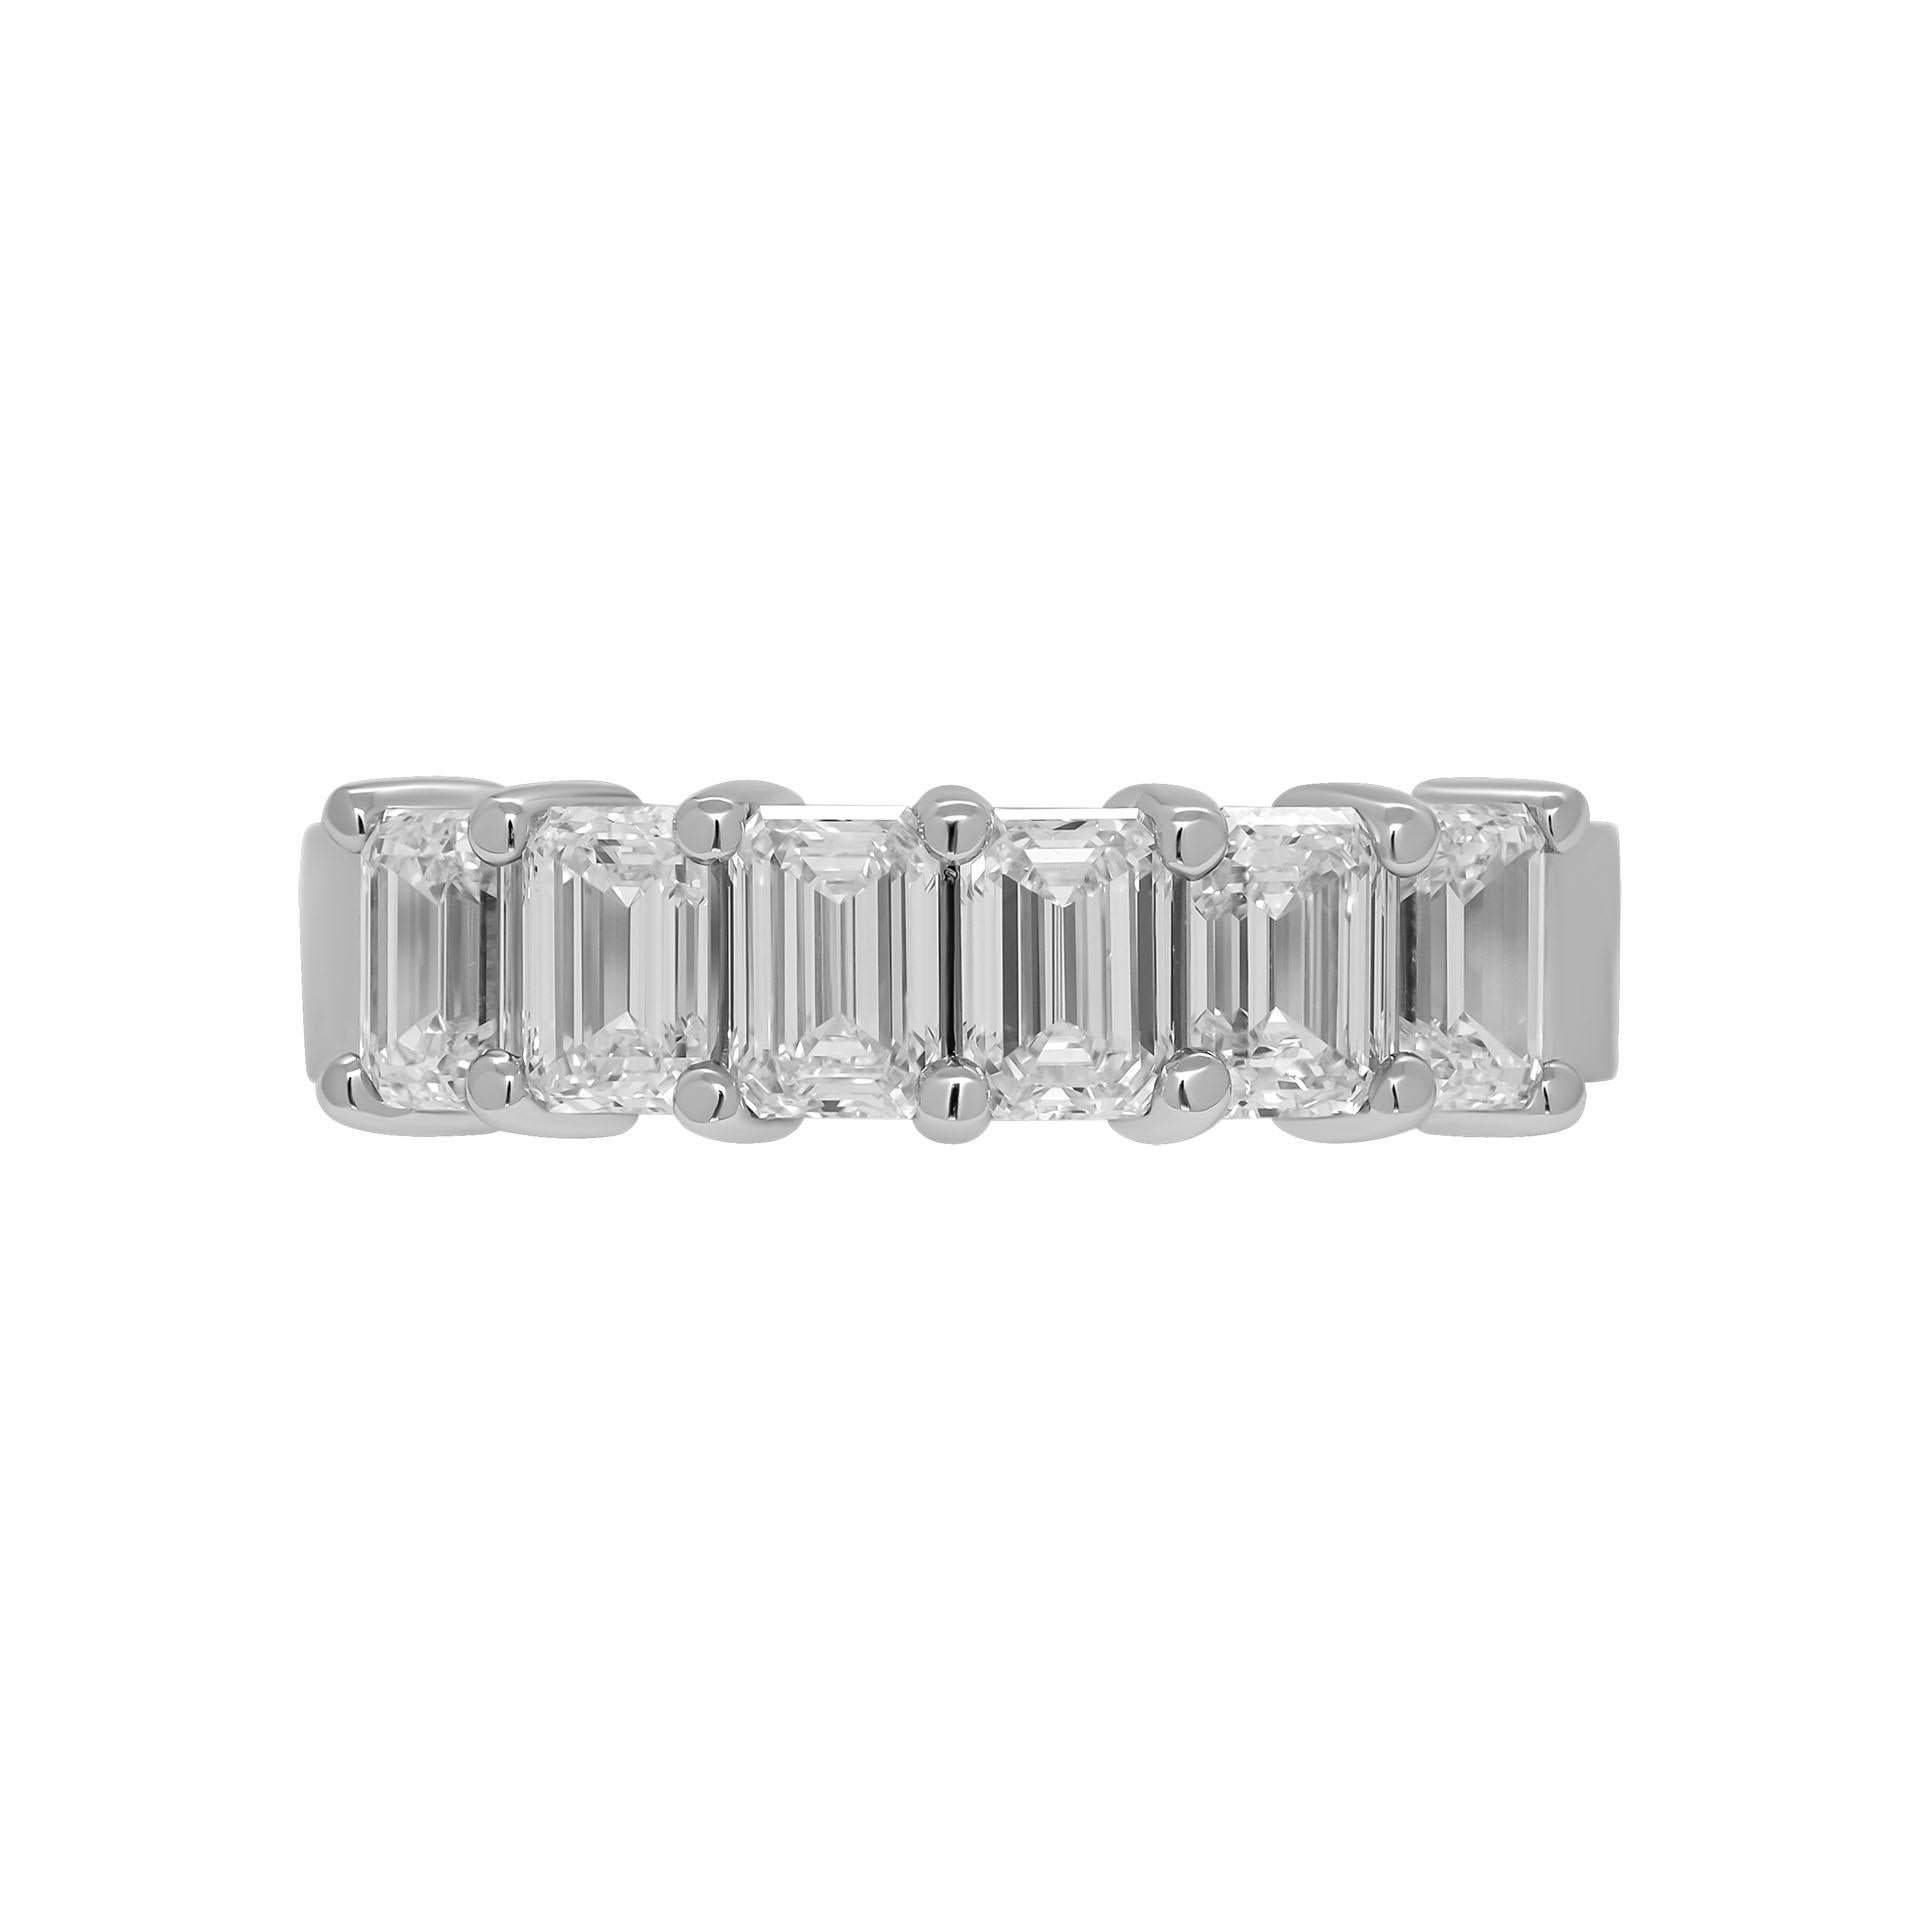 6 stone GIA Certified Emerald cut diamonds 0.30ct each ring in Platinum 
6 stones TCW: 1.84ct 
Each stone is GIA Certified
0.33ct D VVS1 GIA#7391731058
0.31ct D IF GIA#6452127166
0.30ct D VS1 GIA#6432484020
0.30ct D IF GIA#7441213169
0.30ct D IF